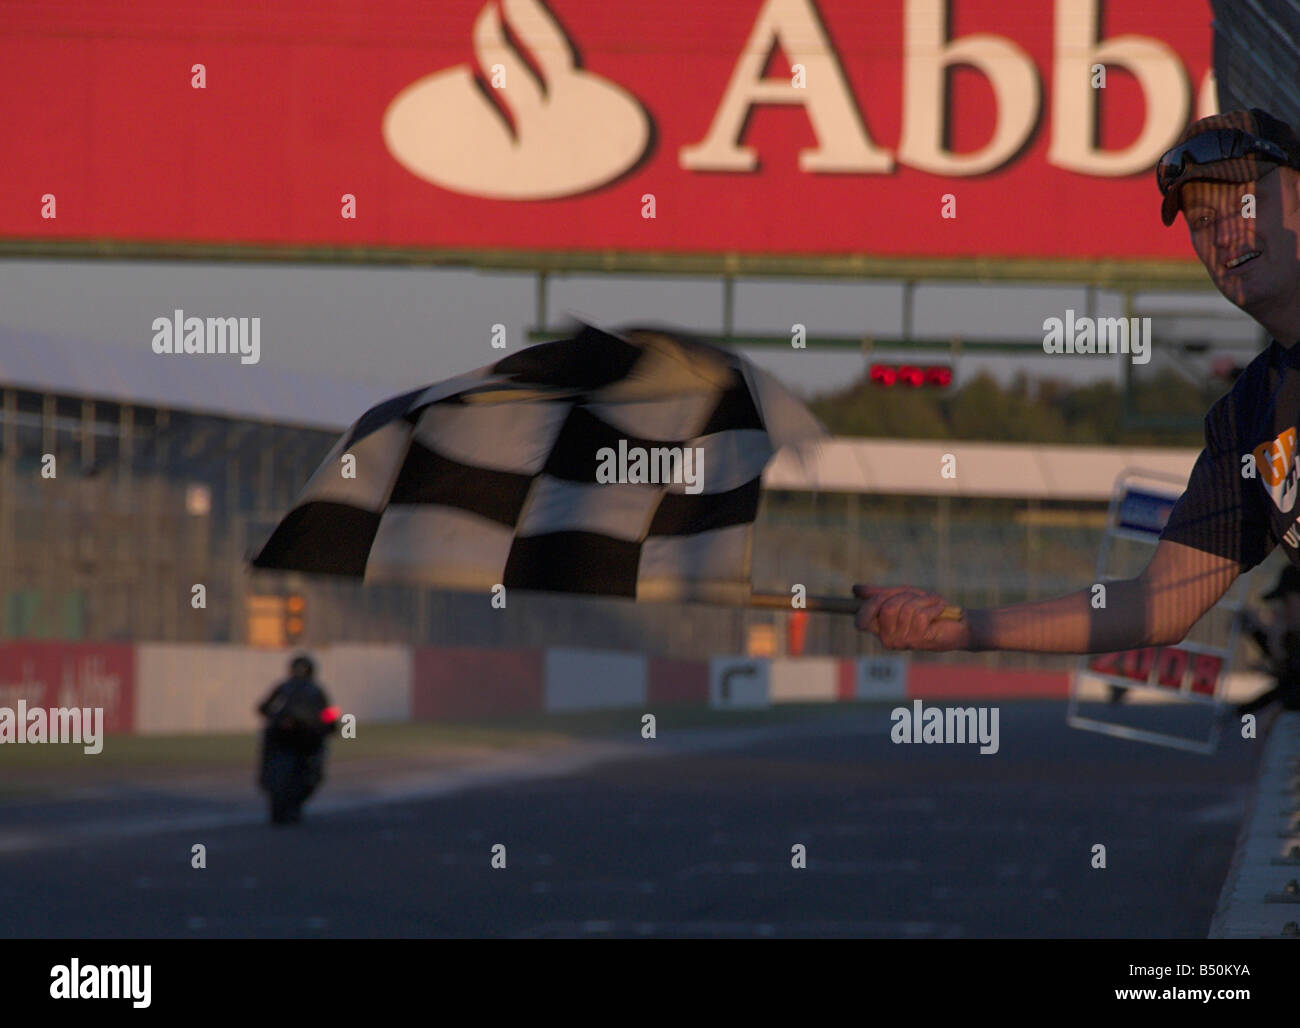 Chequered Flag being Waved at the End of a Motorcycle Endurance Race Stock Photo